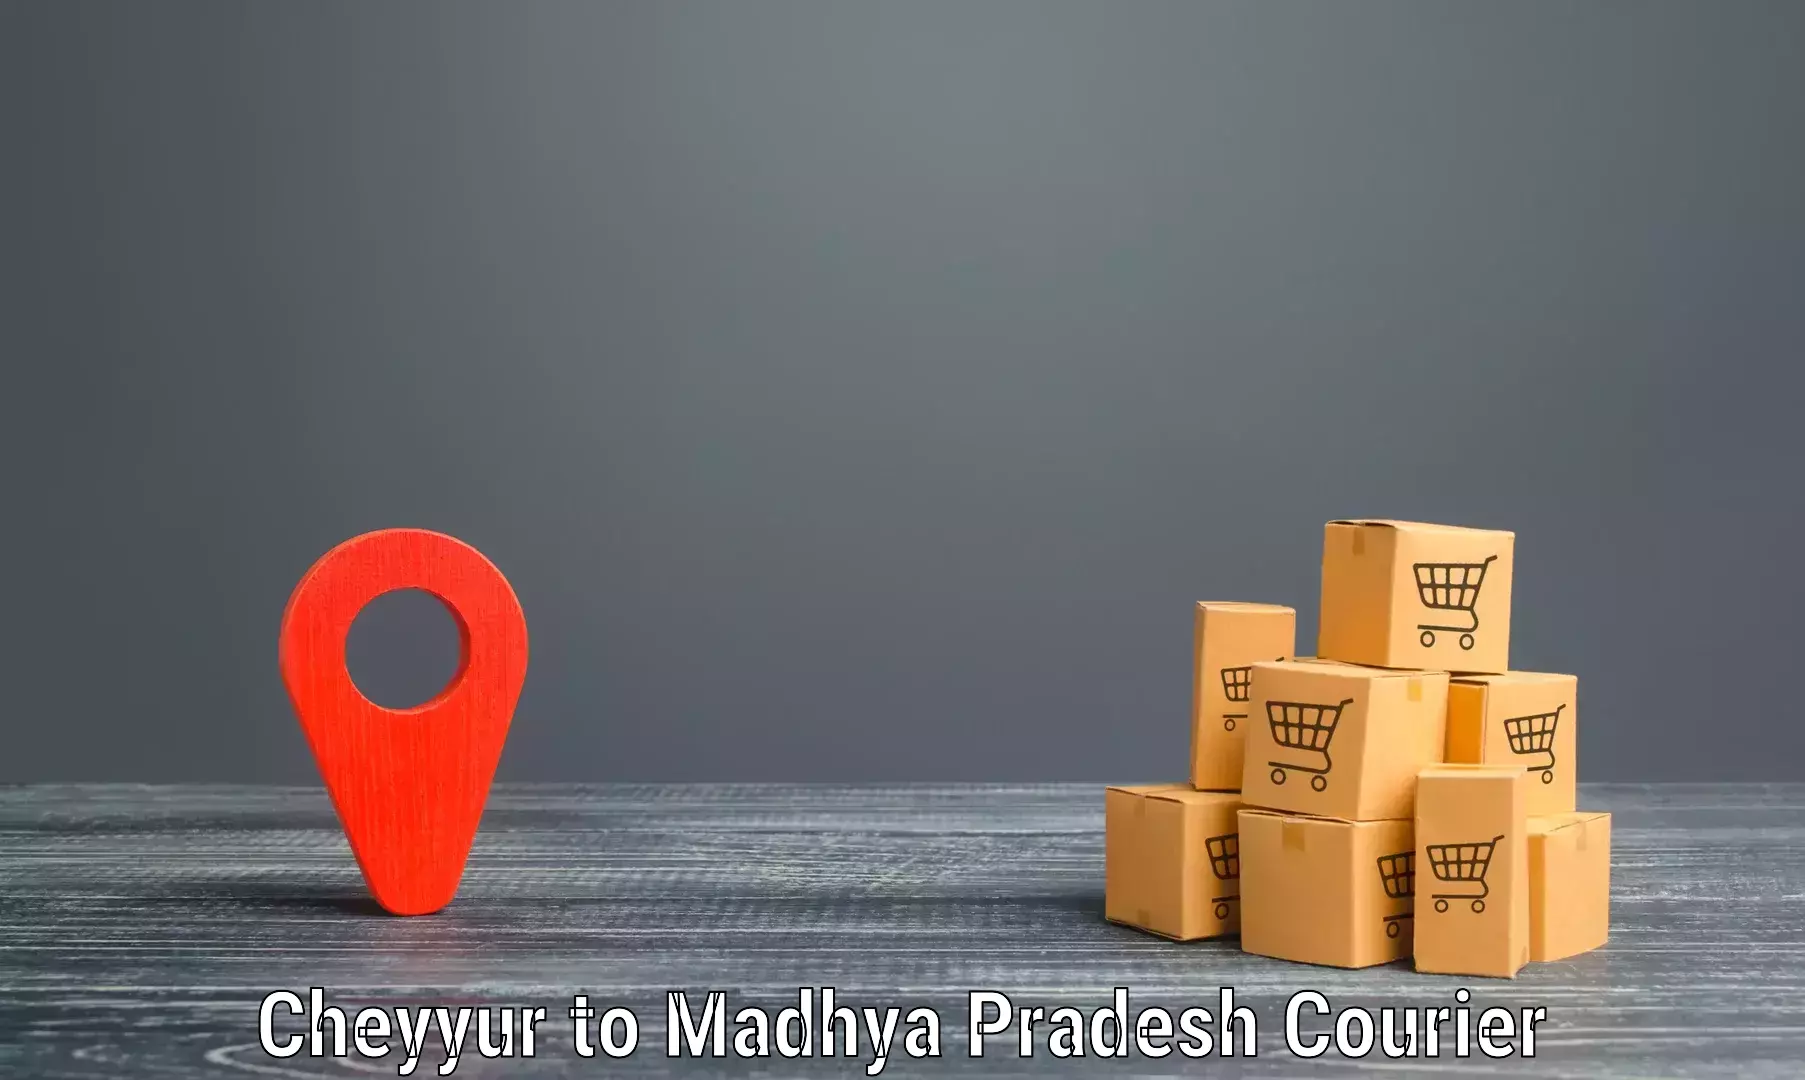 Easy access courier services Cheyyur to Athner